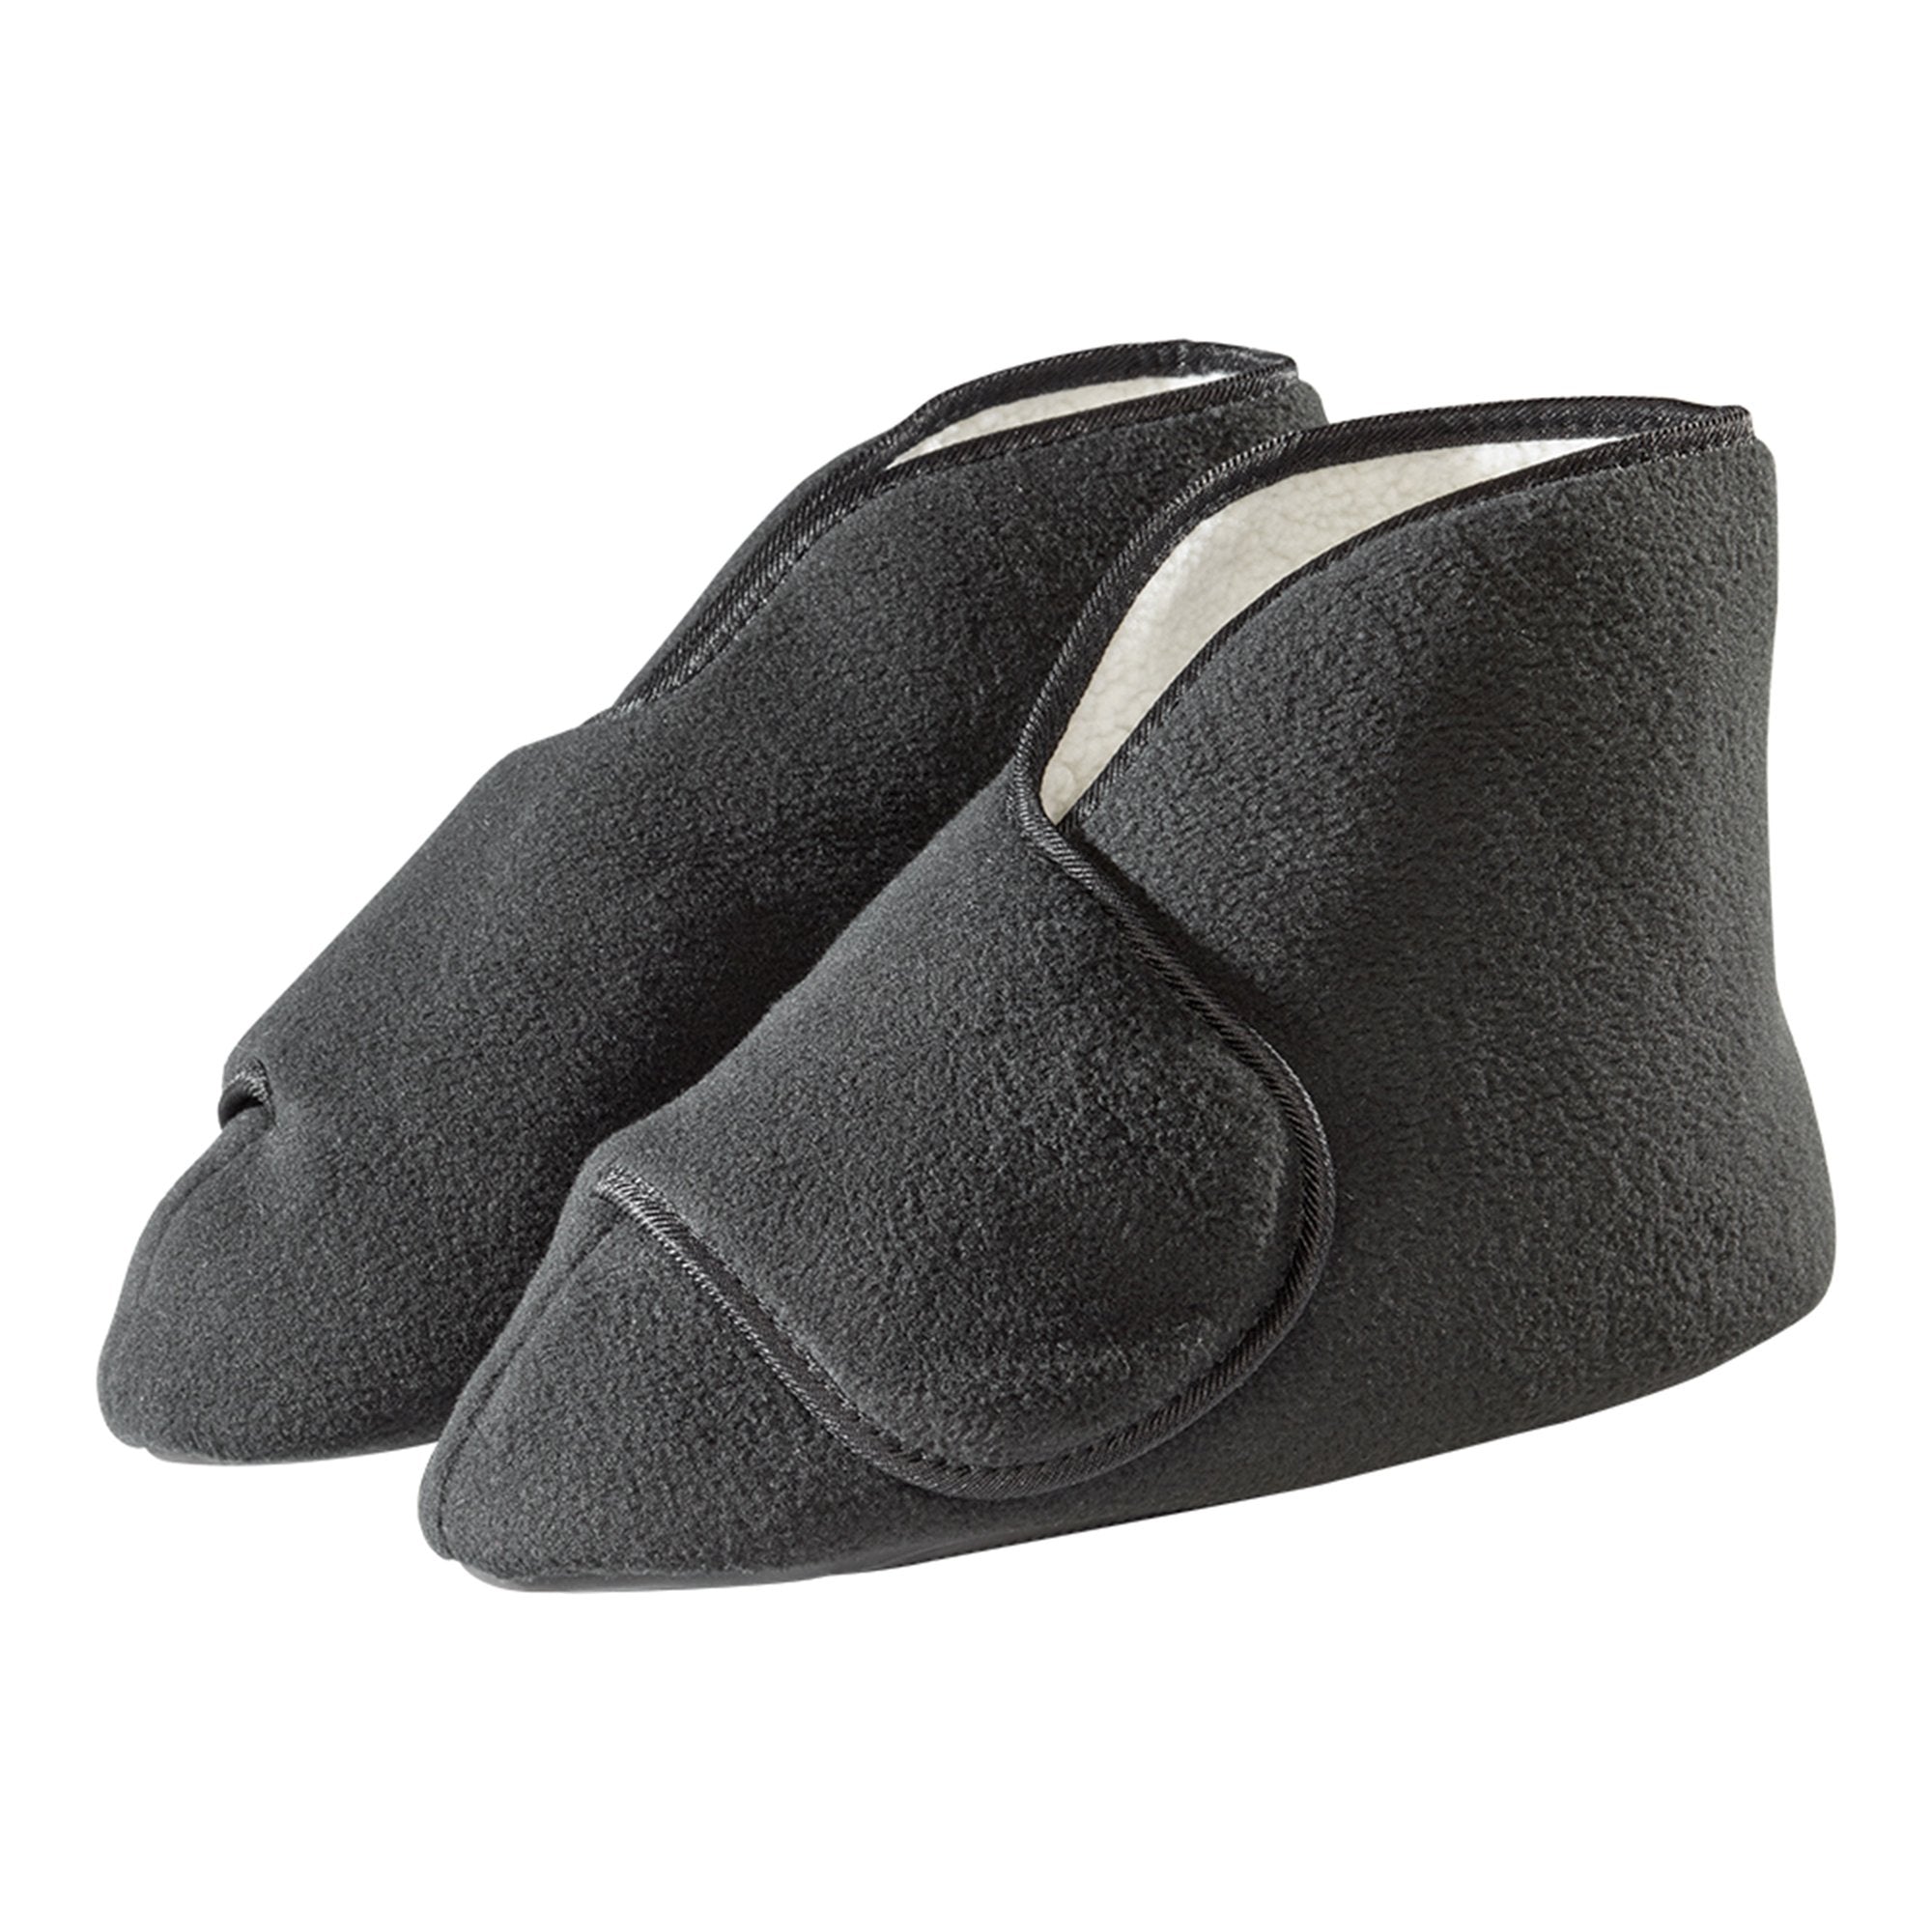 Diabetic Bootie Slippers Silverts® Large / X-Wide Black Ankle High